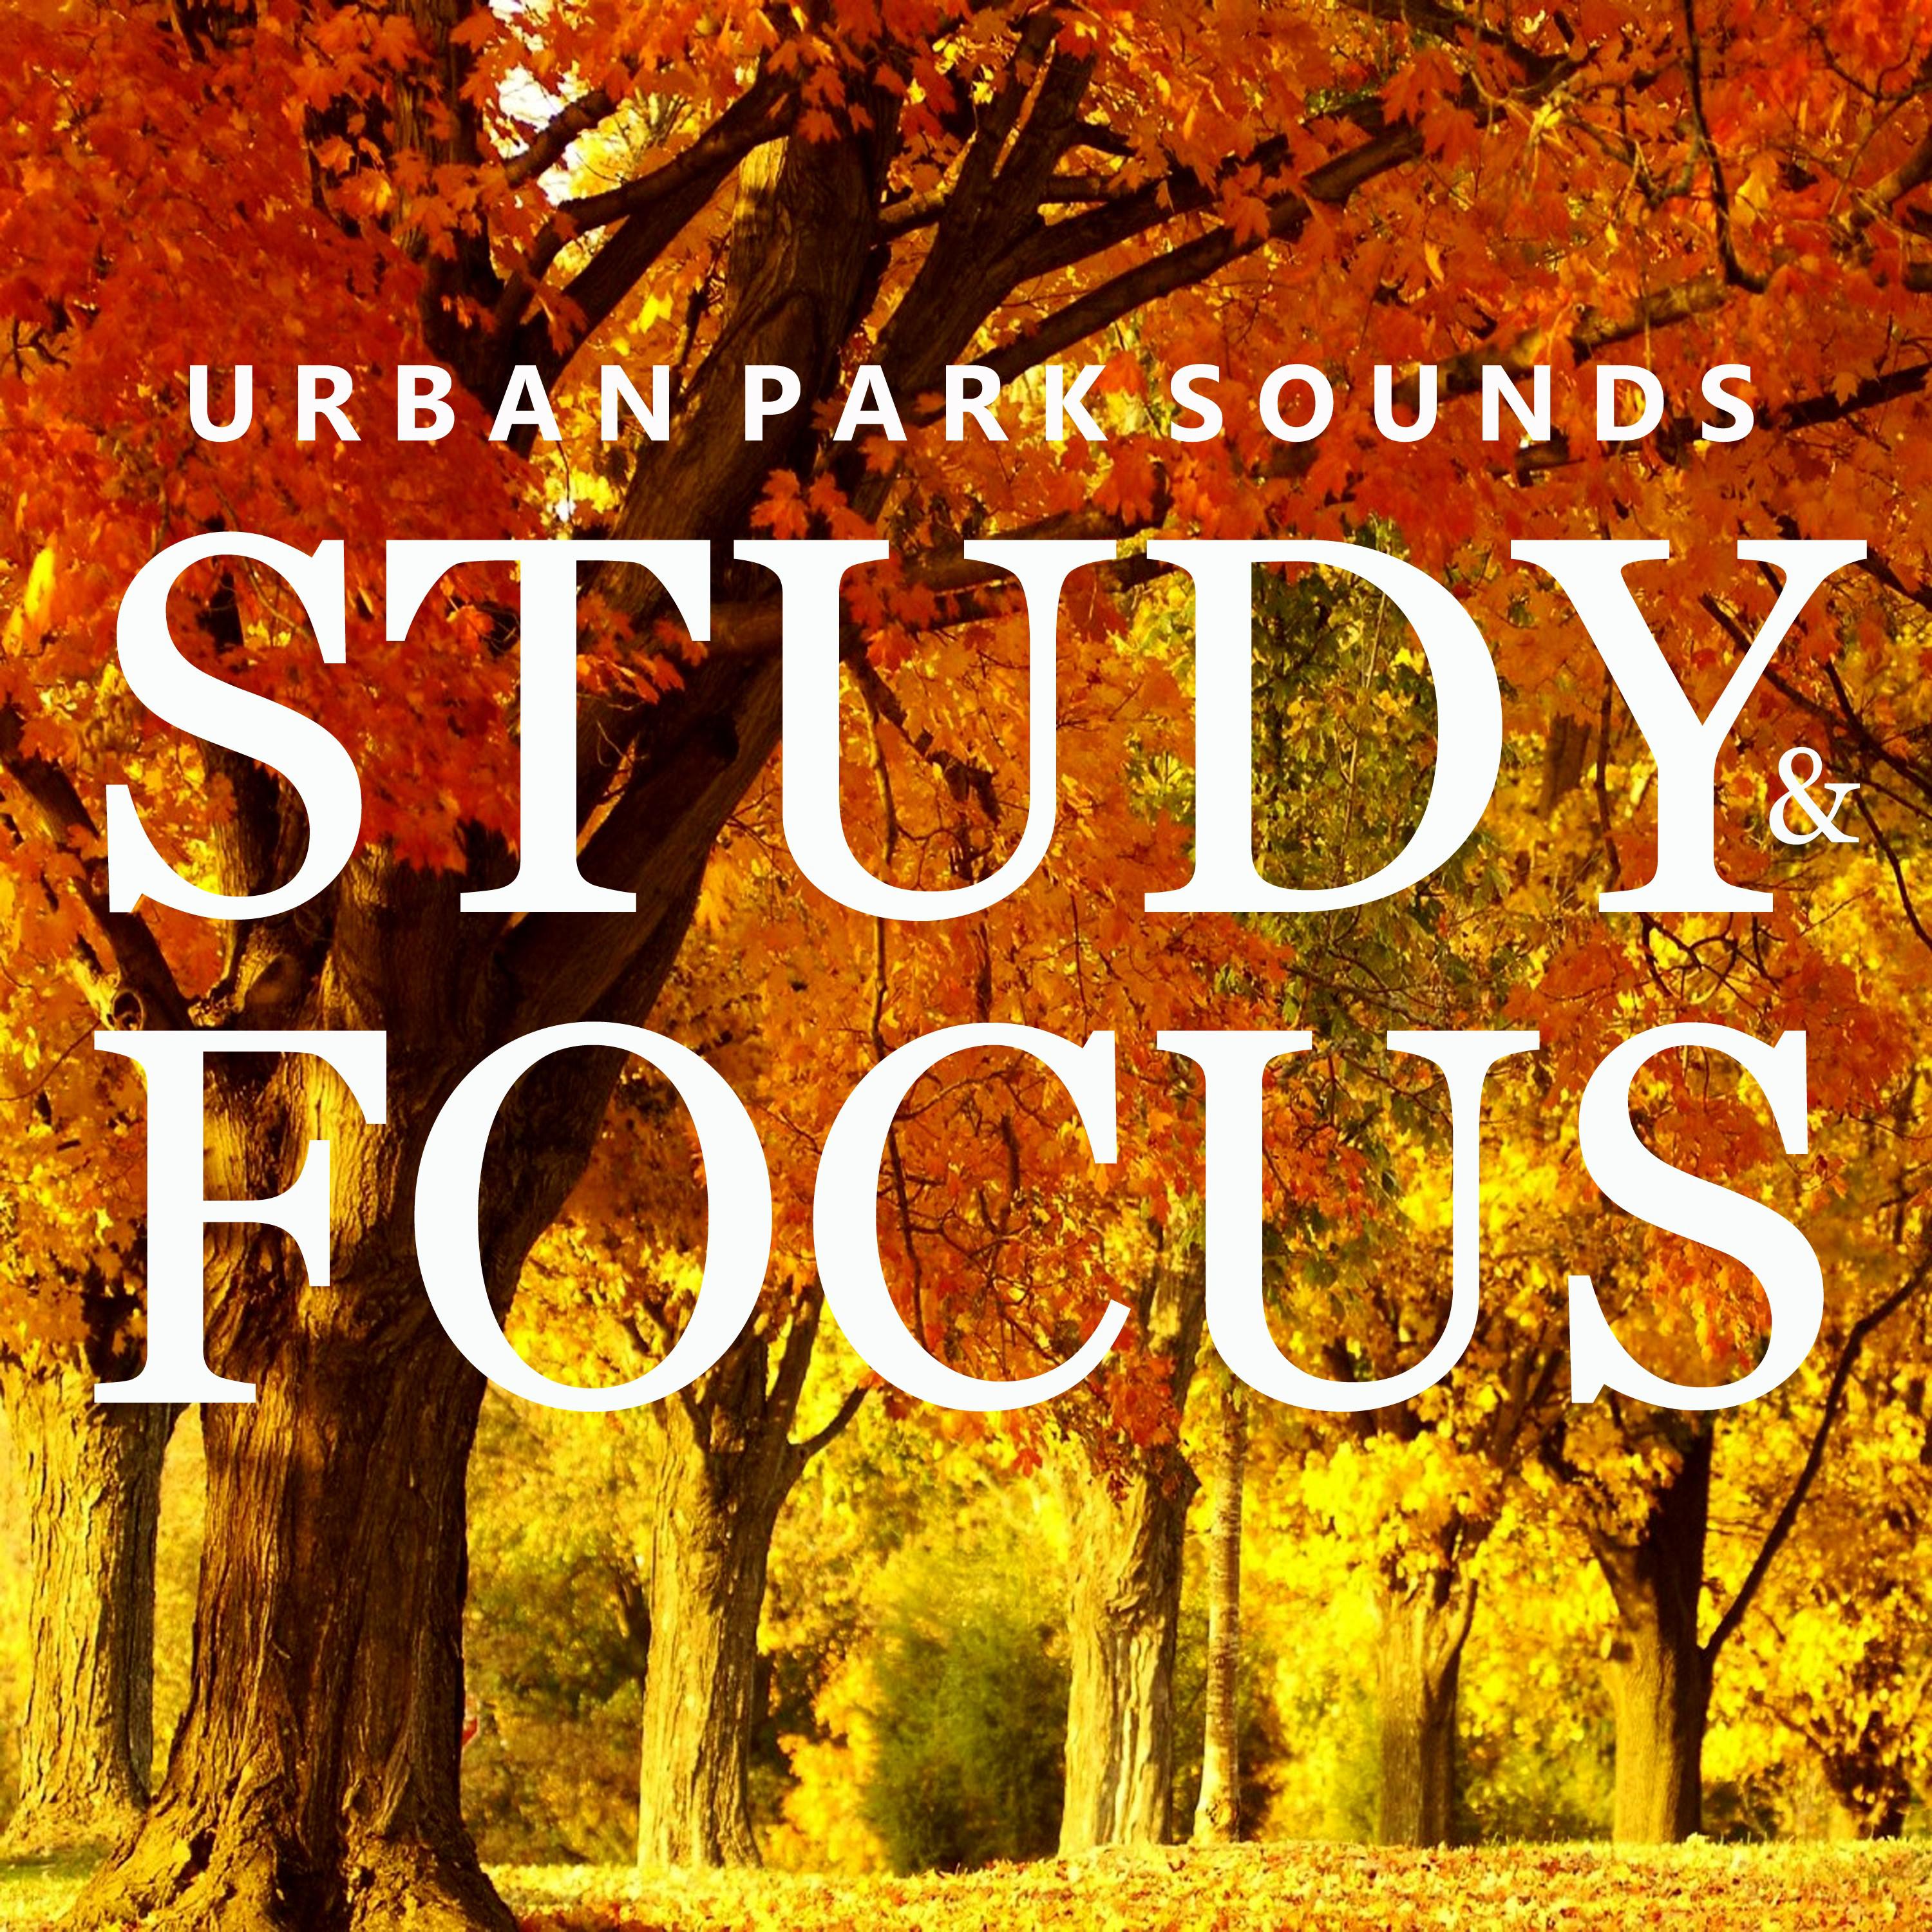 Urban Park Sounds for Studying, Pt. 09